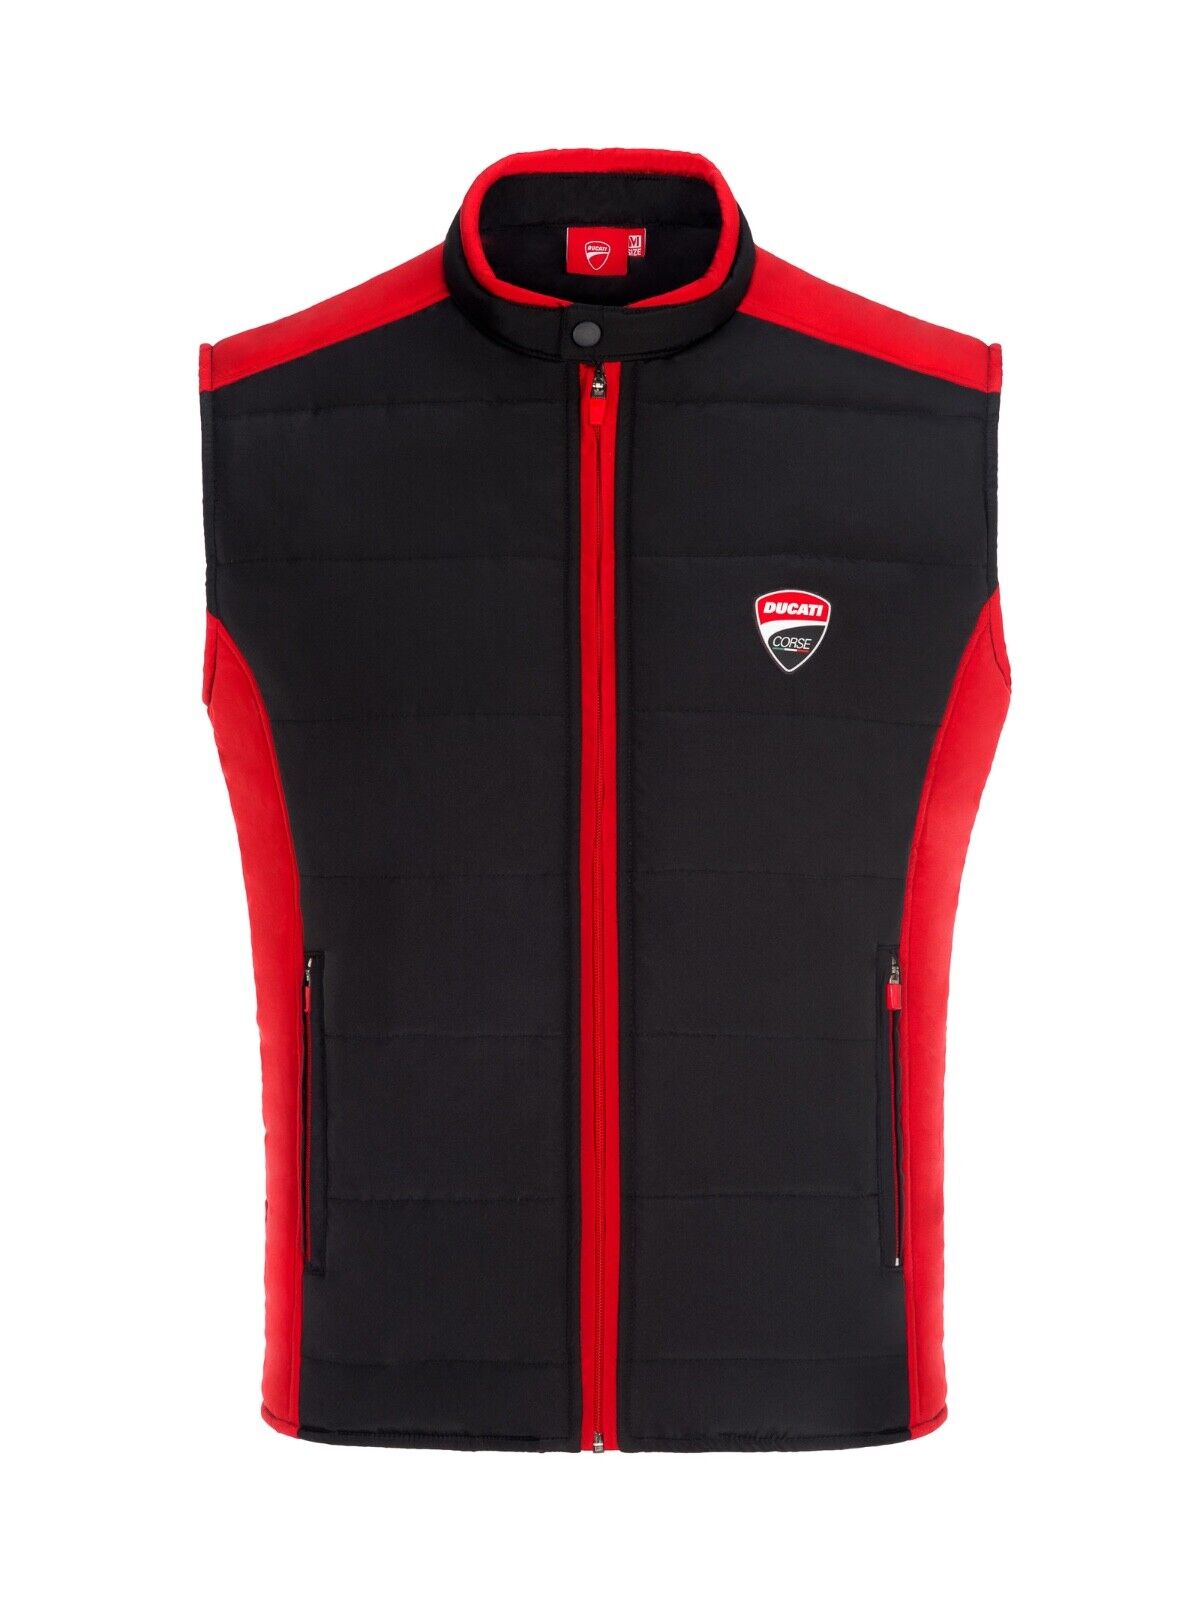 Ducati Corse Official Quilted Polar Bodywarmer- 19 66003